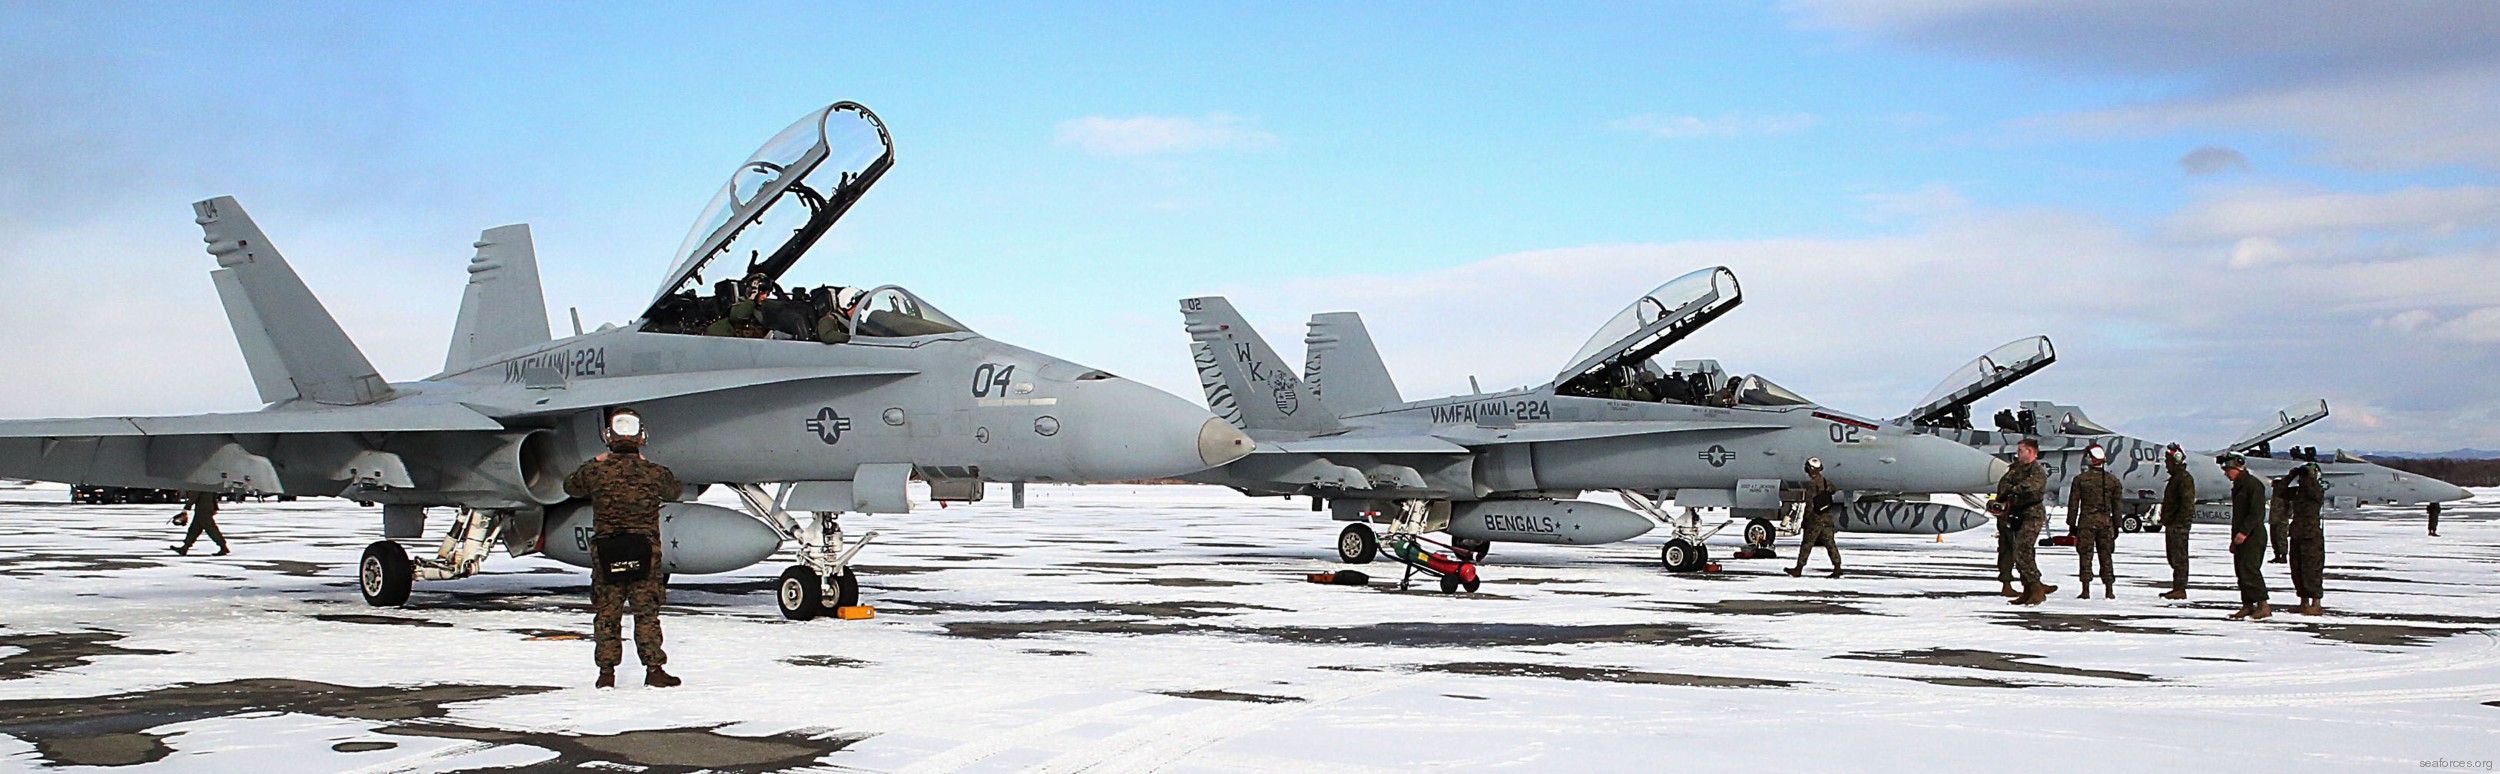 vmfa(aw)-224 bengals marine fighter attack squadron usmc f/a-18d hornet 34 chitose airbase japan